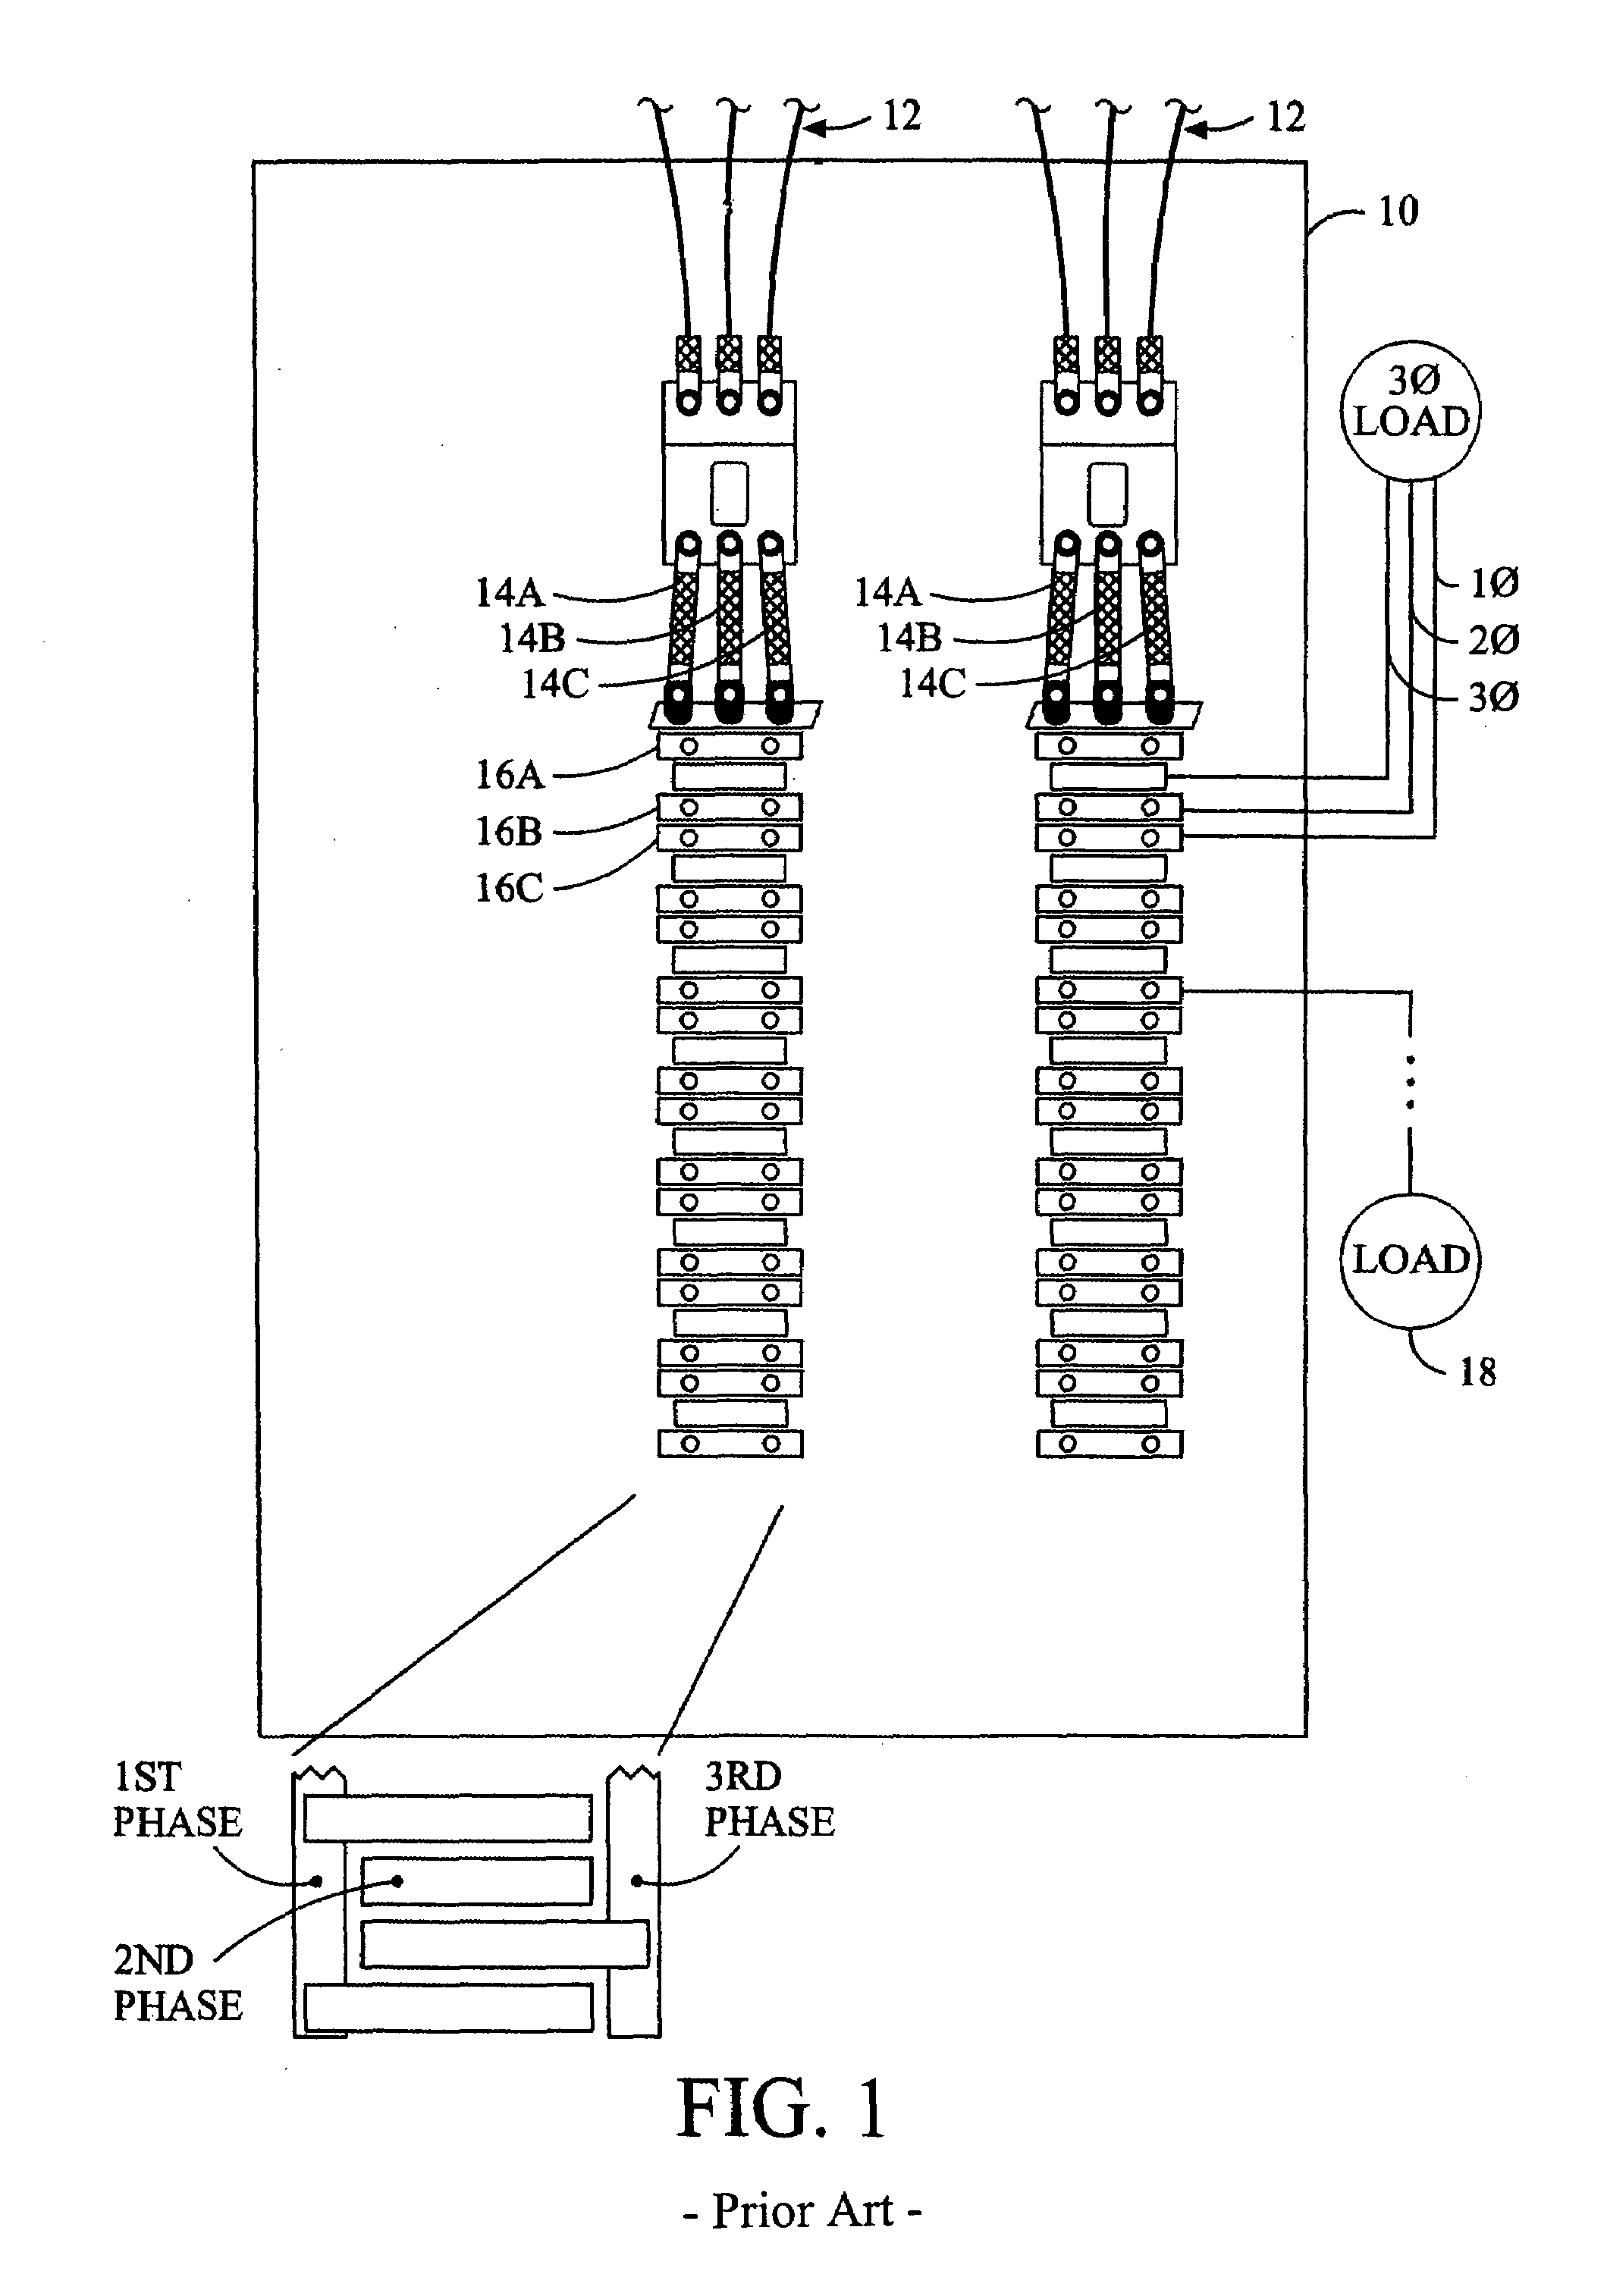 Simplified power monitoring system for electrical panels